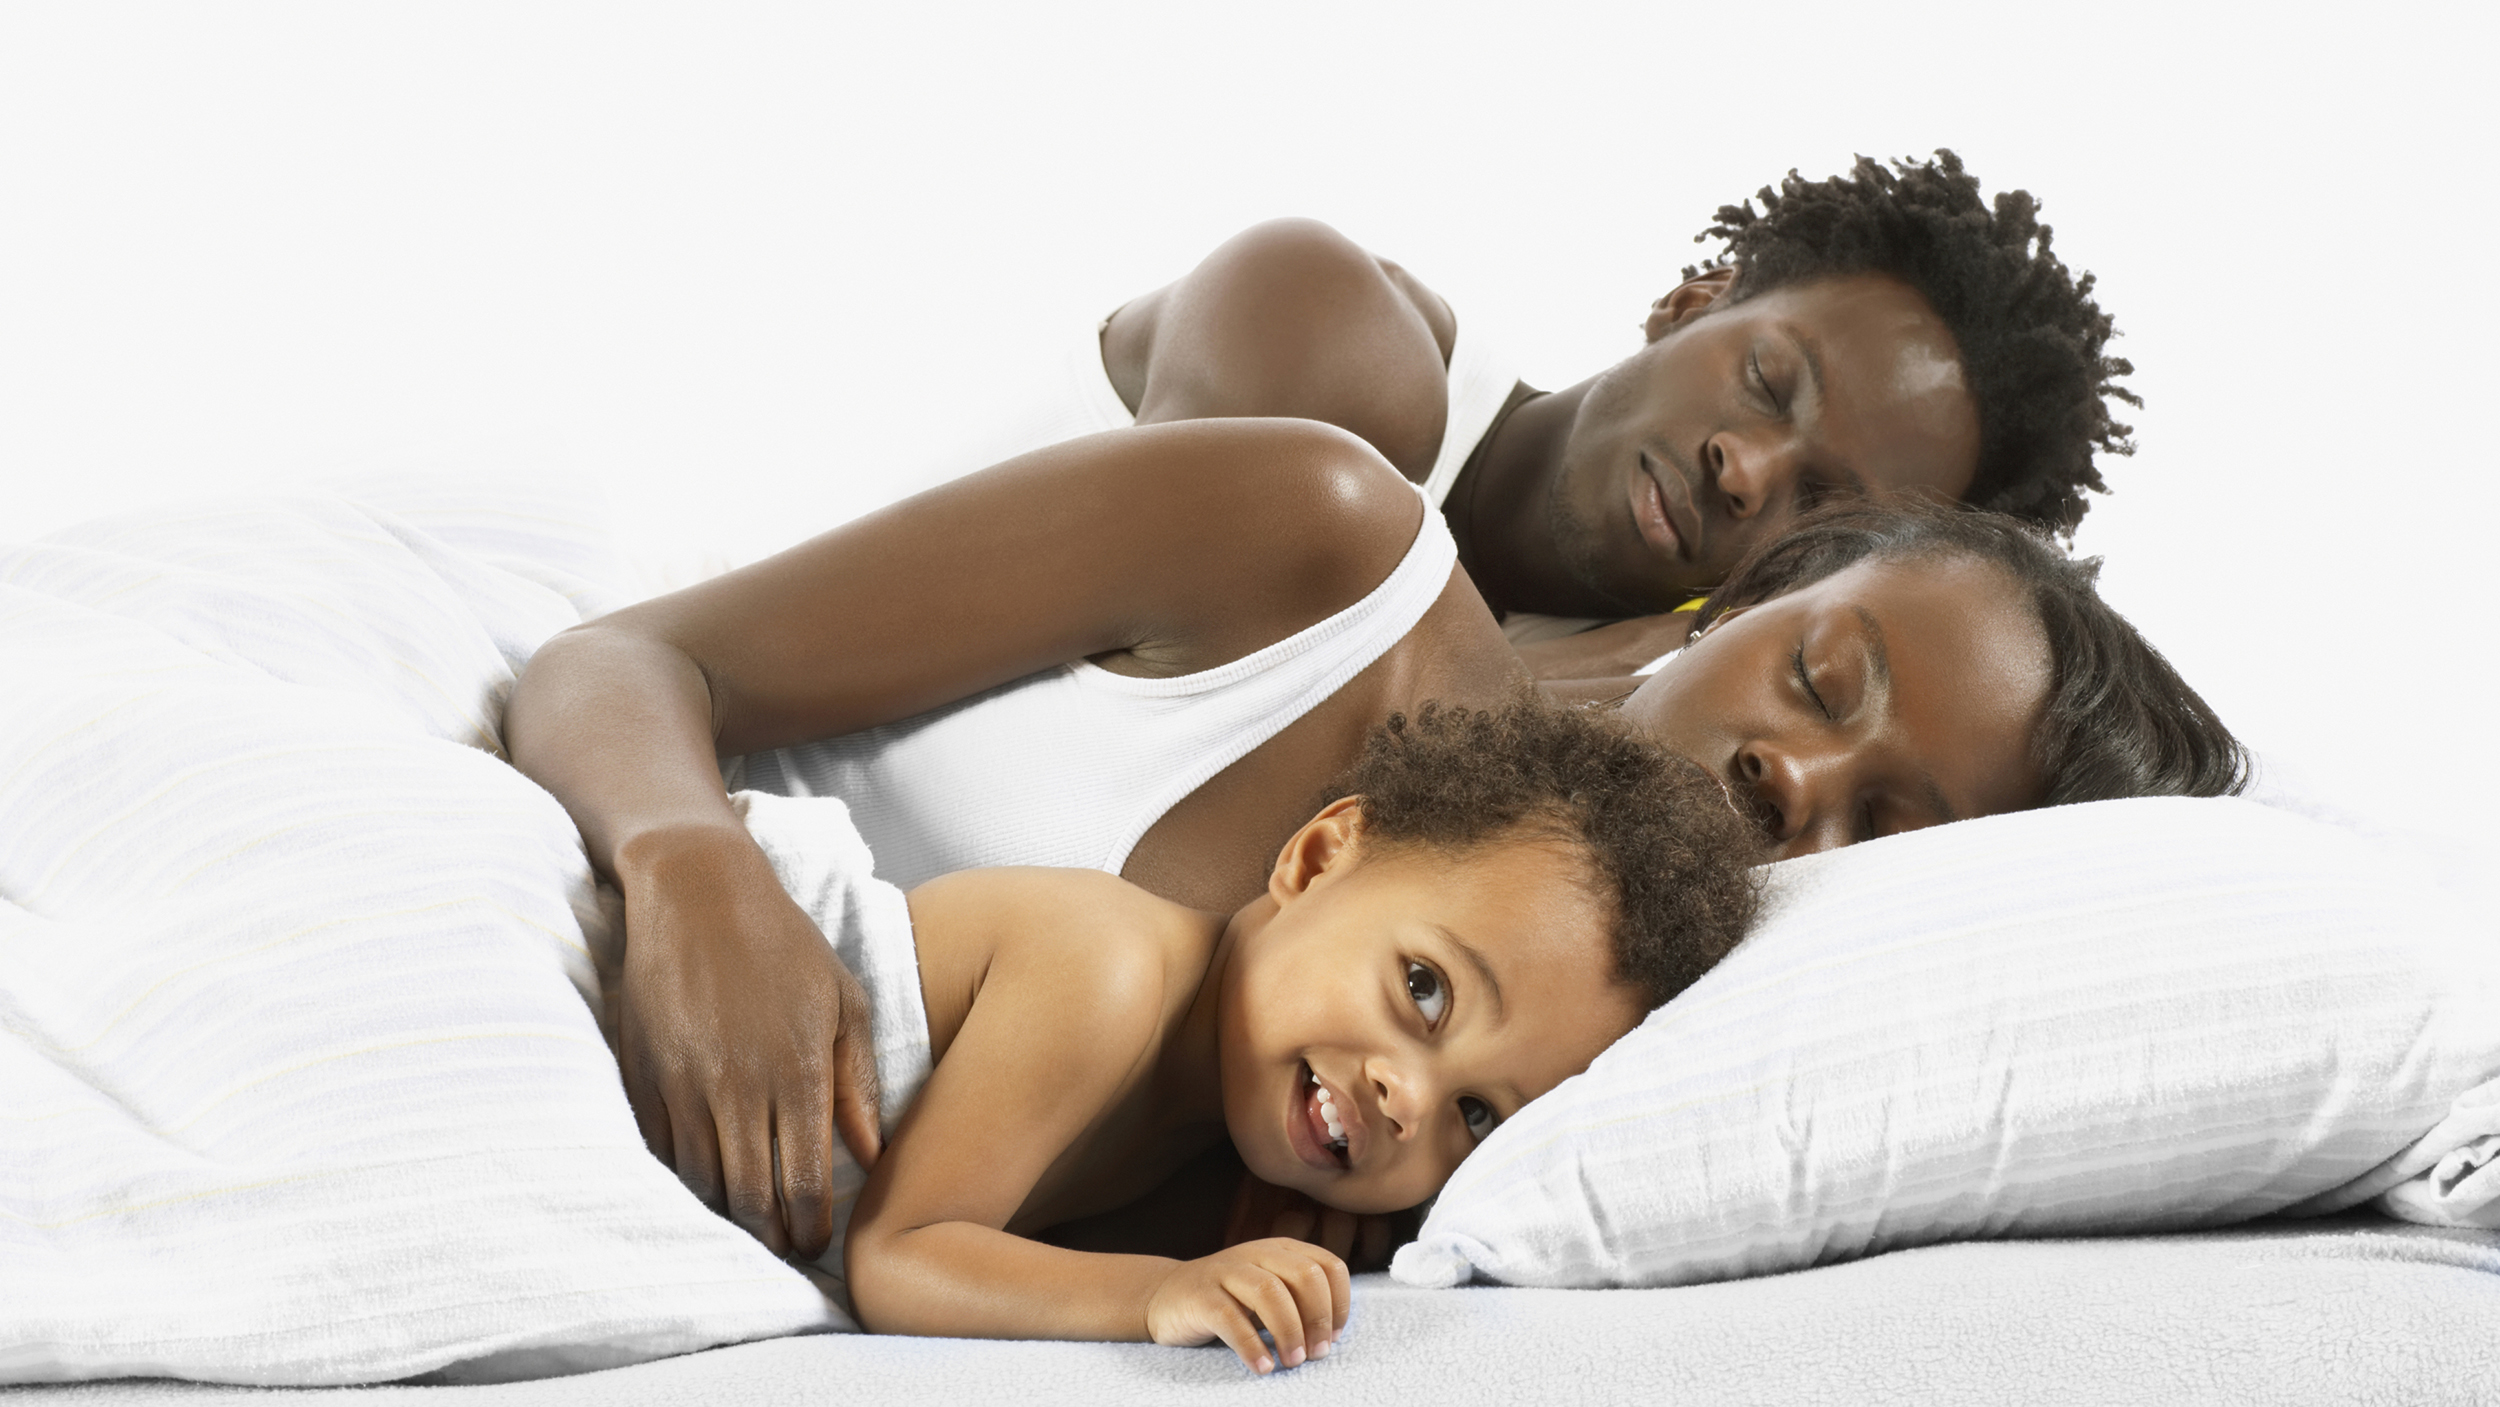 Getty Images stockIs co-sleeping safe for babies? We